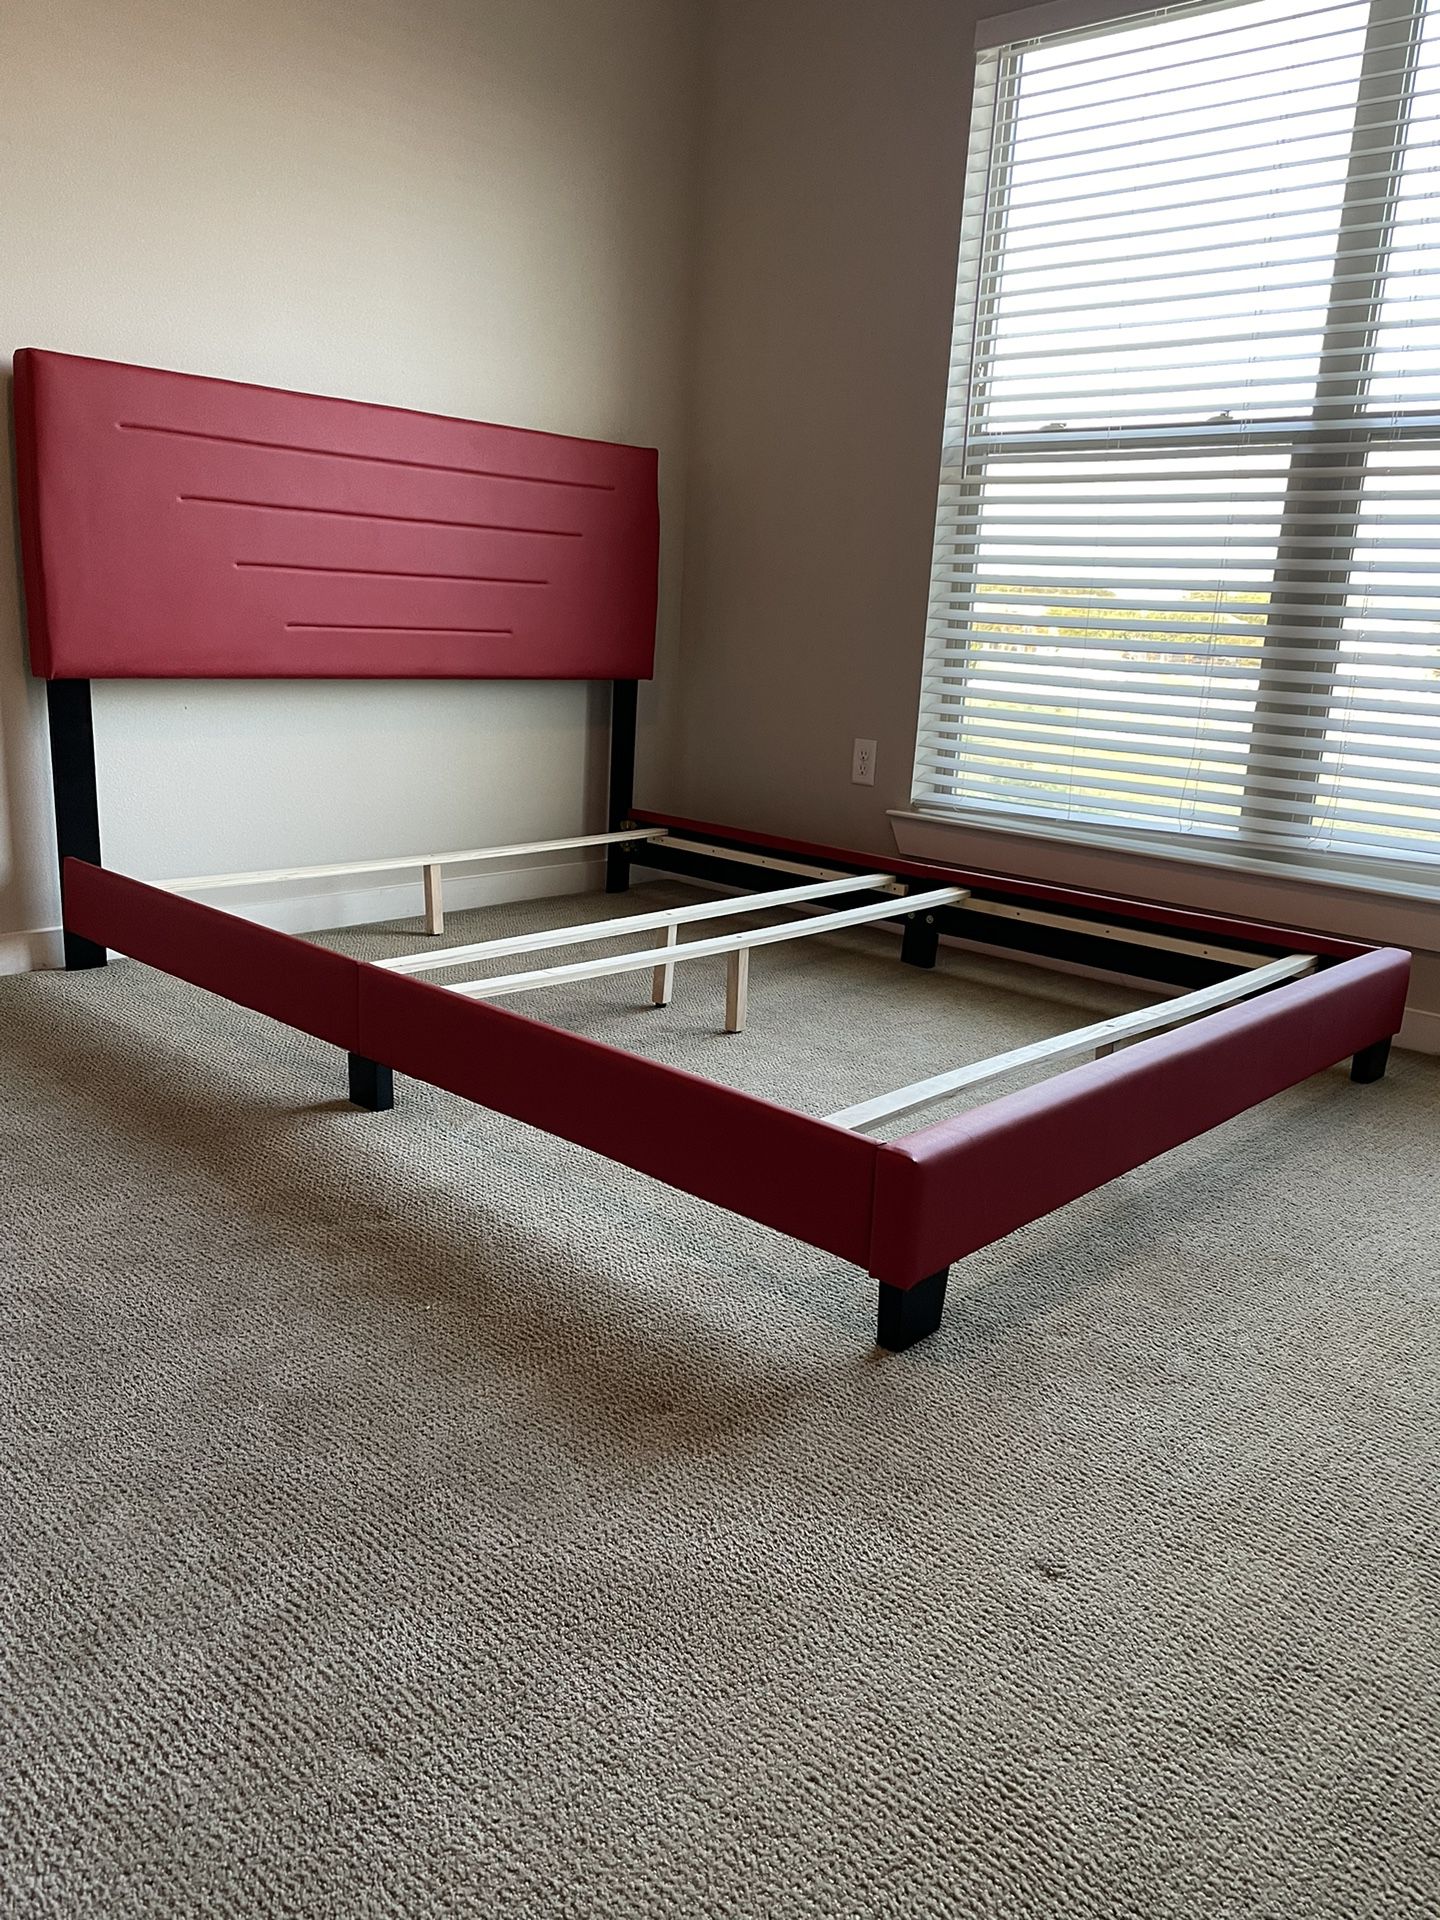 Queen Size Bed Frame /Full Size Mattress & Box Spring